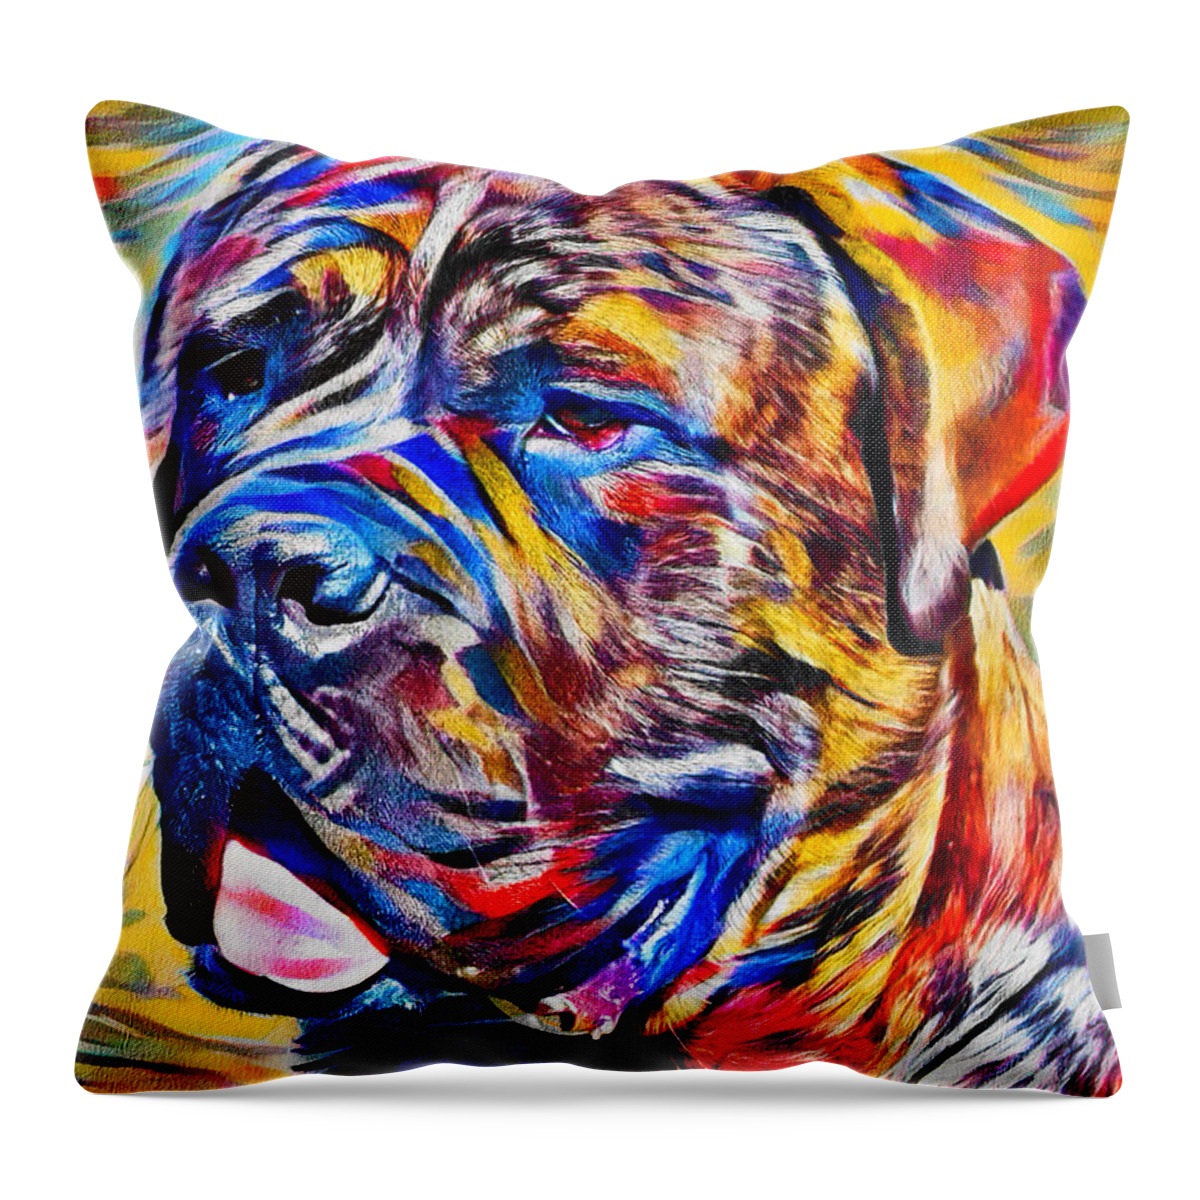 English Mastiff Throw Pillow featuring the digital art English Mastiff head close-up - colorful zebra pattern painting by Nicko Prints